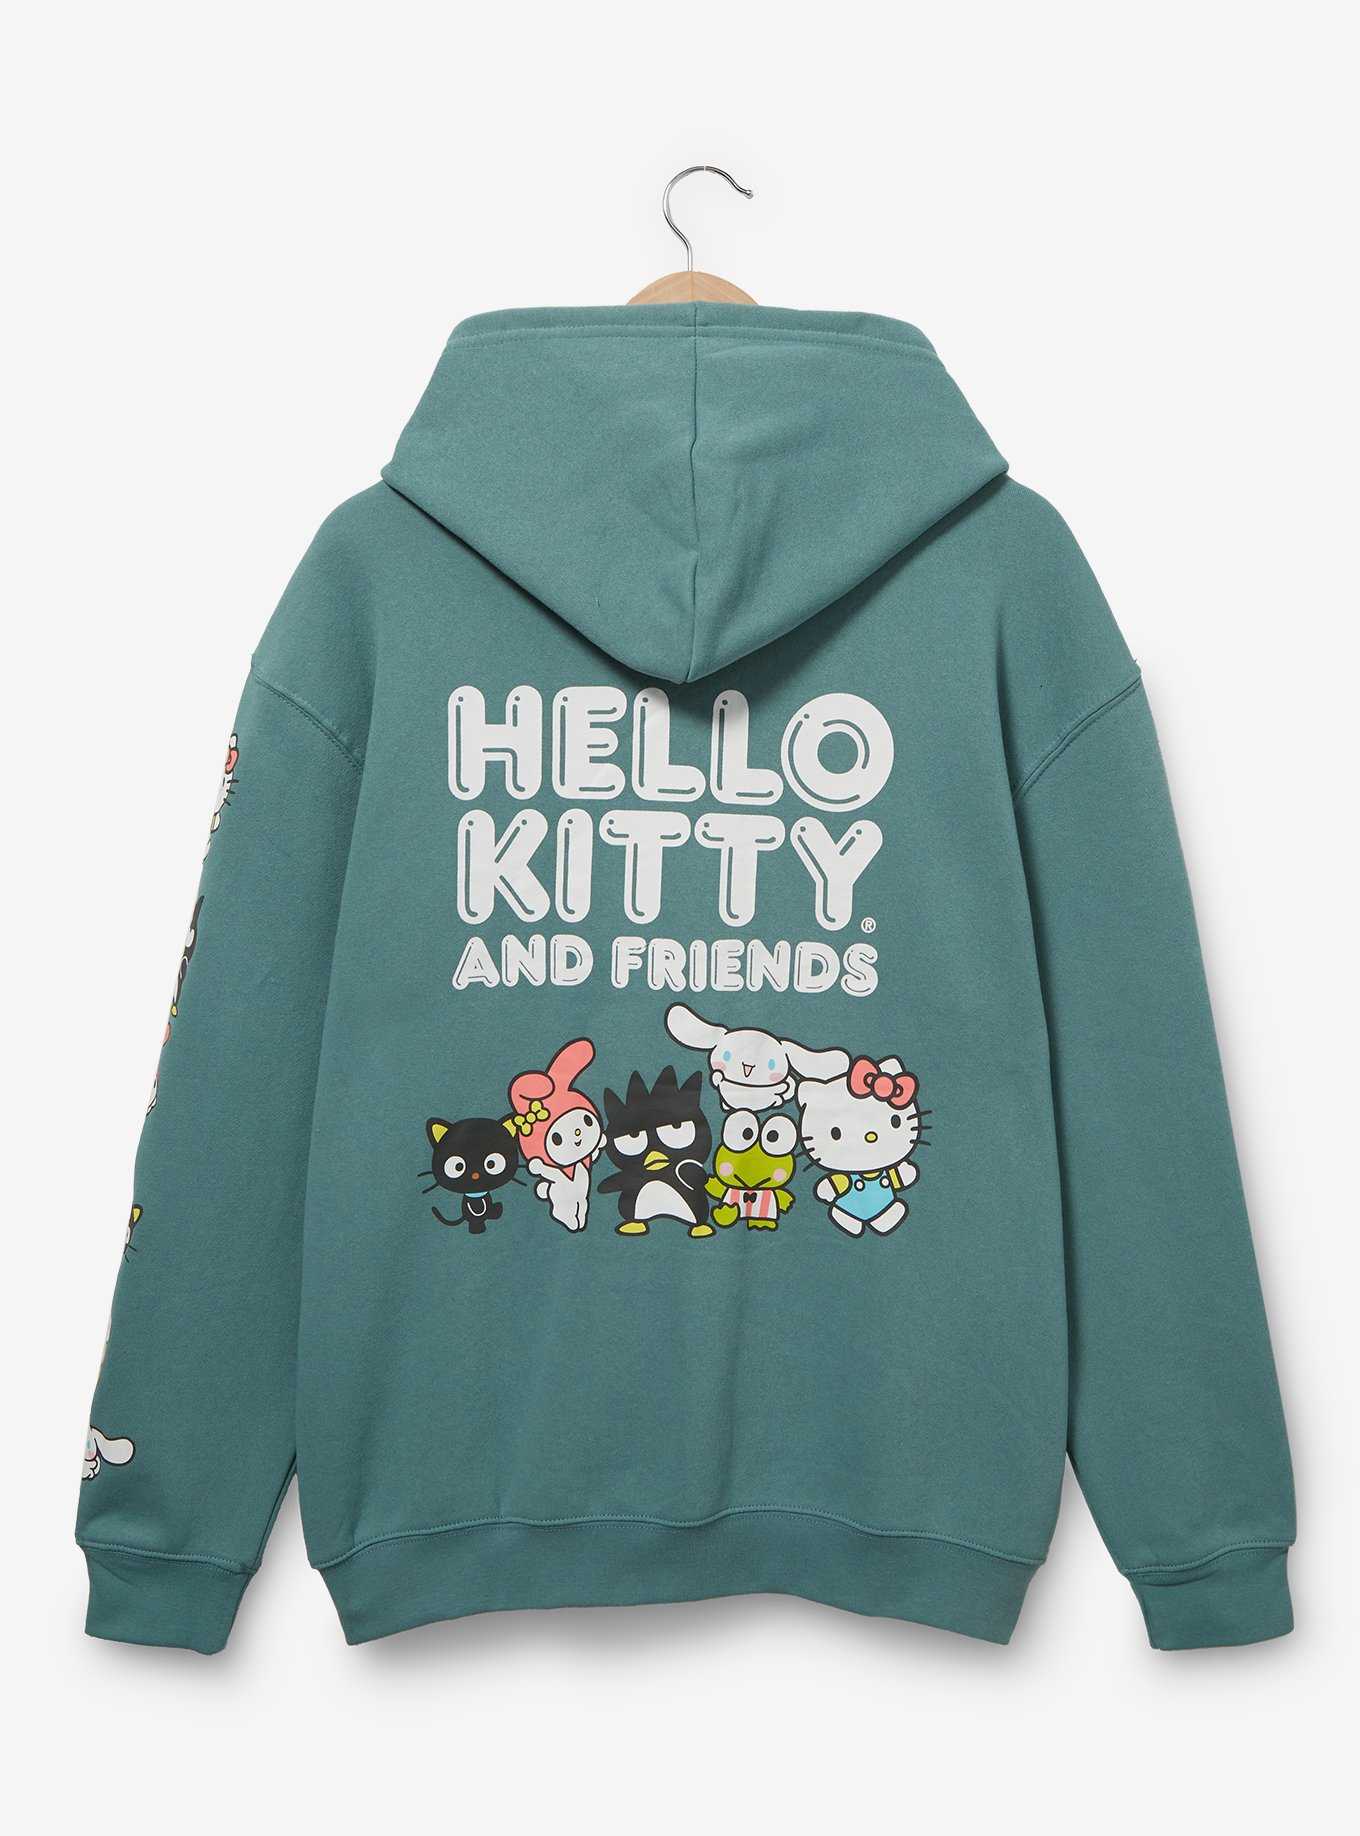 Sanrio Hello Kitty and Friends Group Portrait Zippered Hoodie - BoxLunch Exclusive, , hi-res